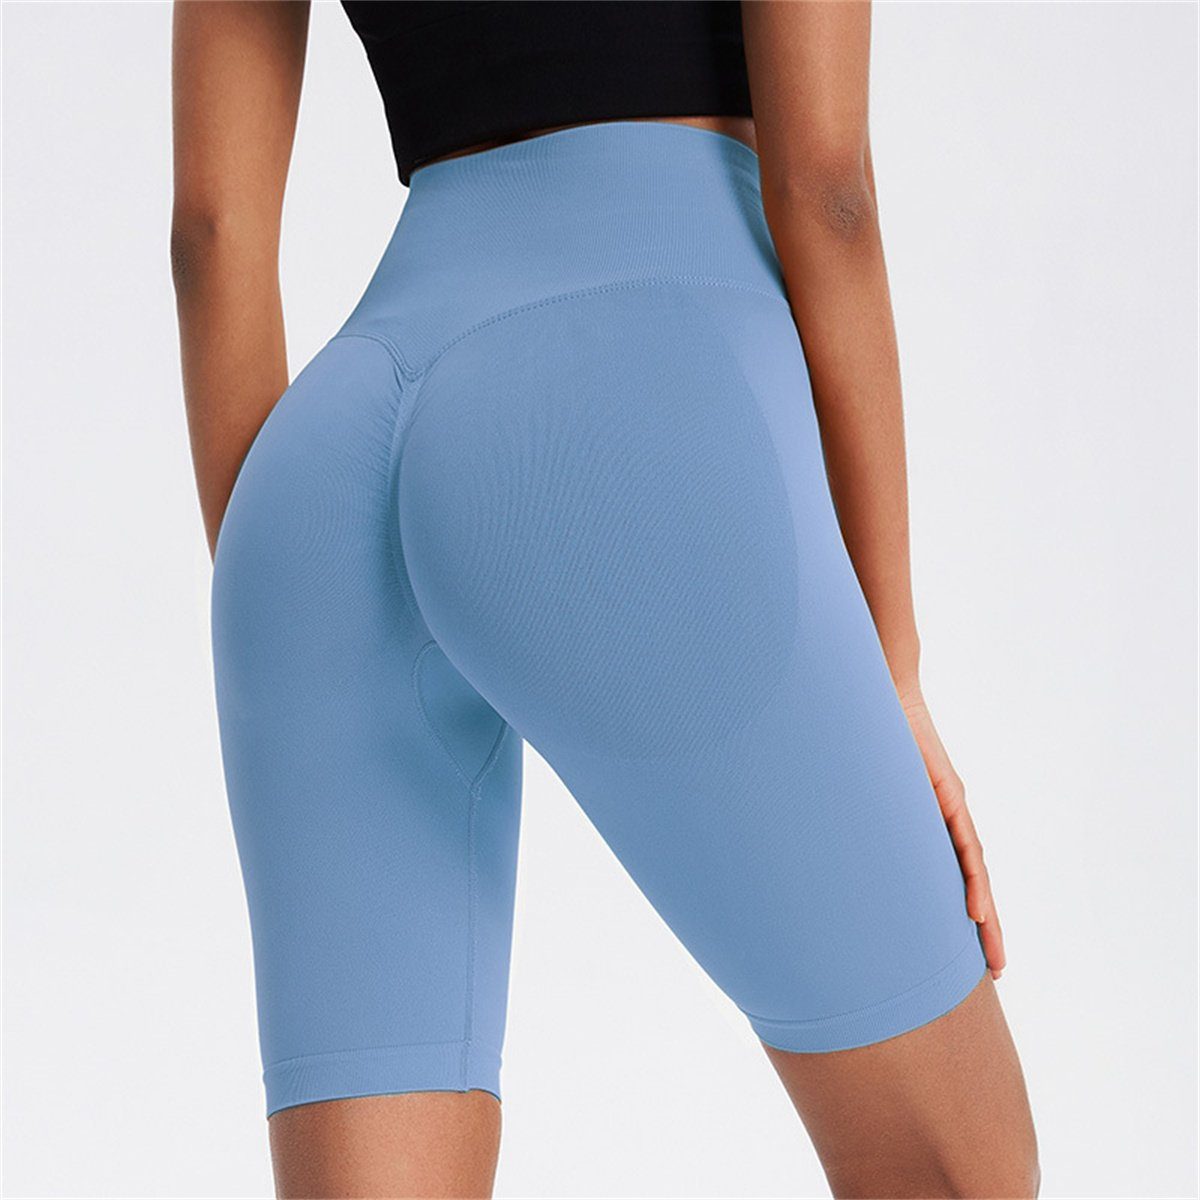 carefully selected Yogatights Damen-Fitness-Po-Lifting-Yoga-Shorts mit hoher Taille hellblau